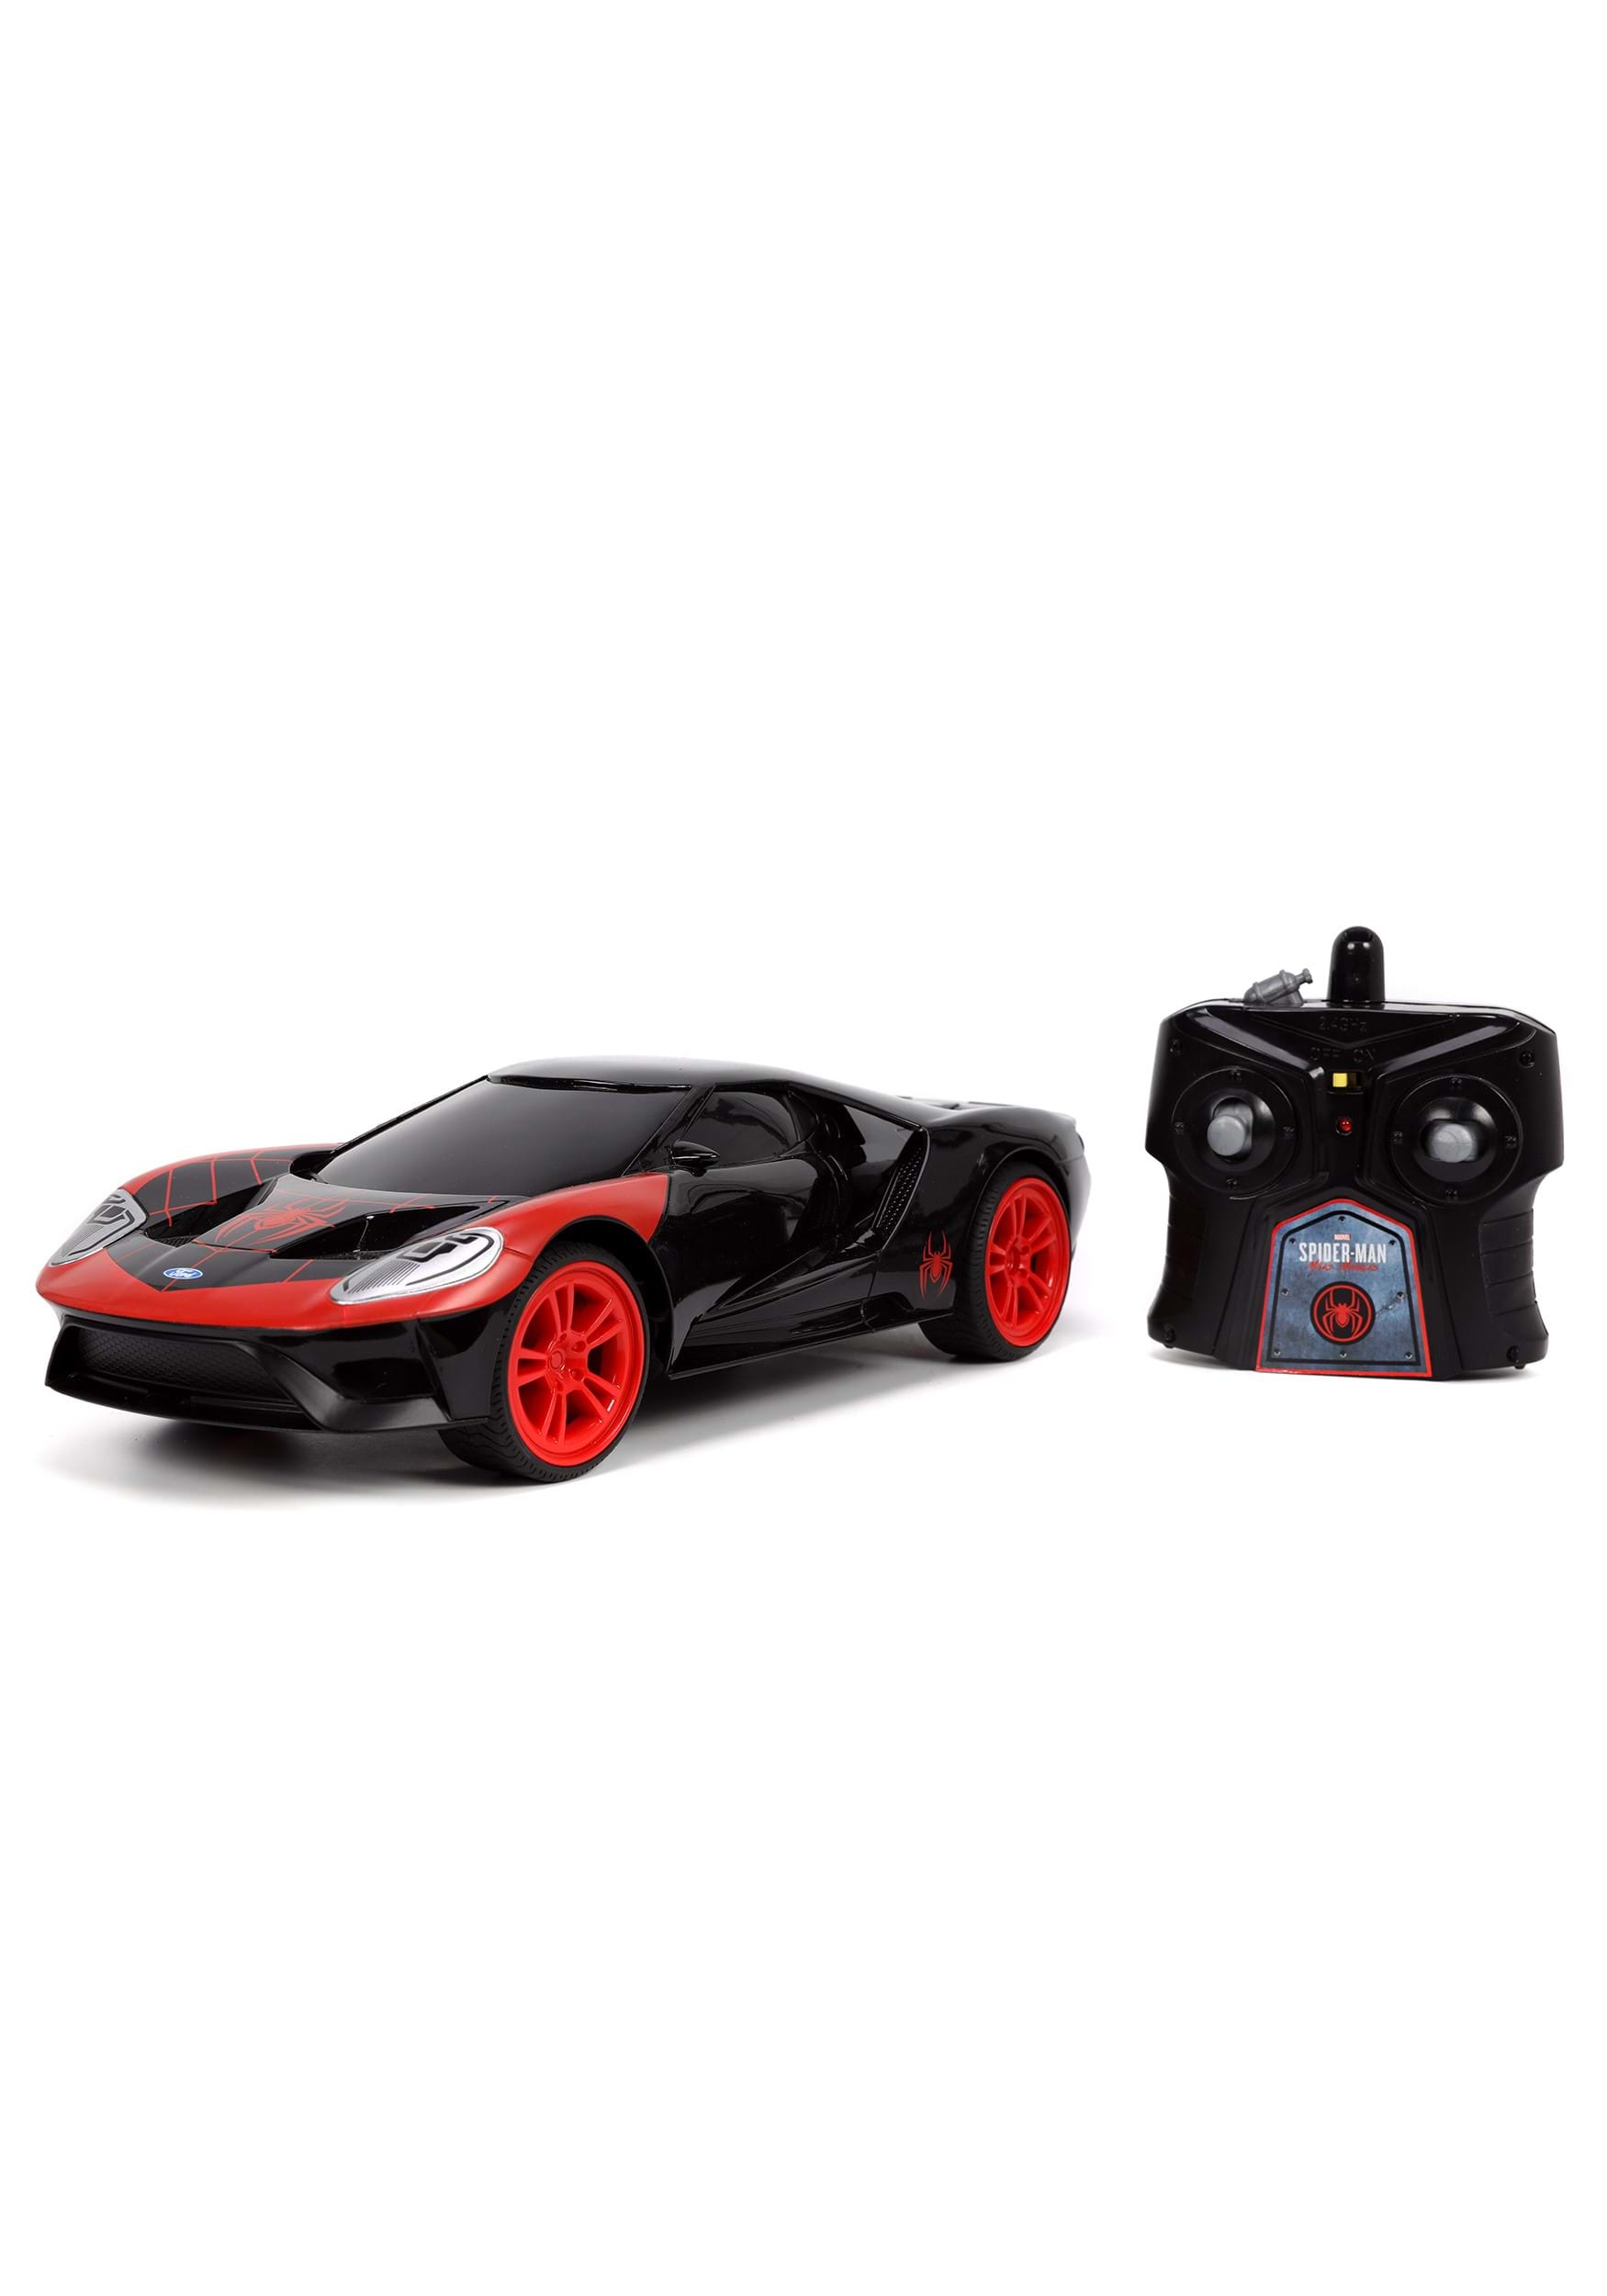 Miles Morales 17 Ford GT 1:16 RC Vehicle